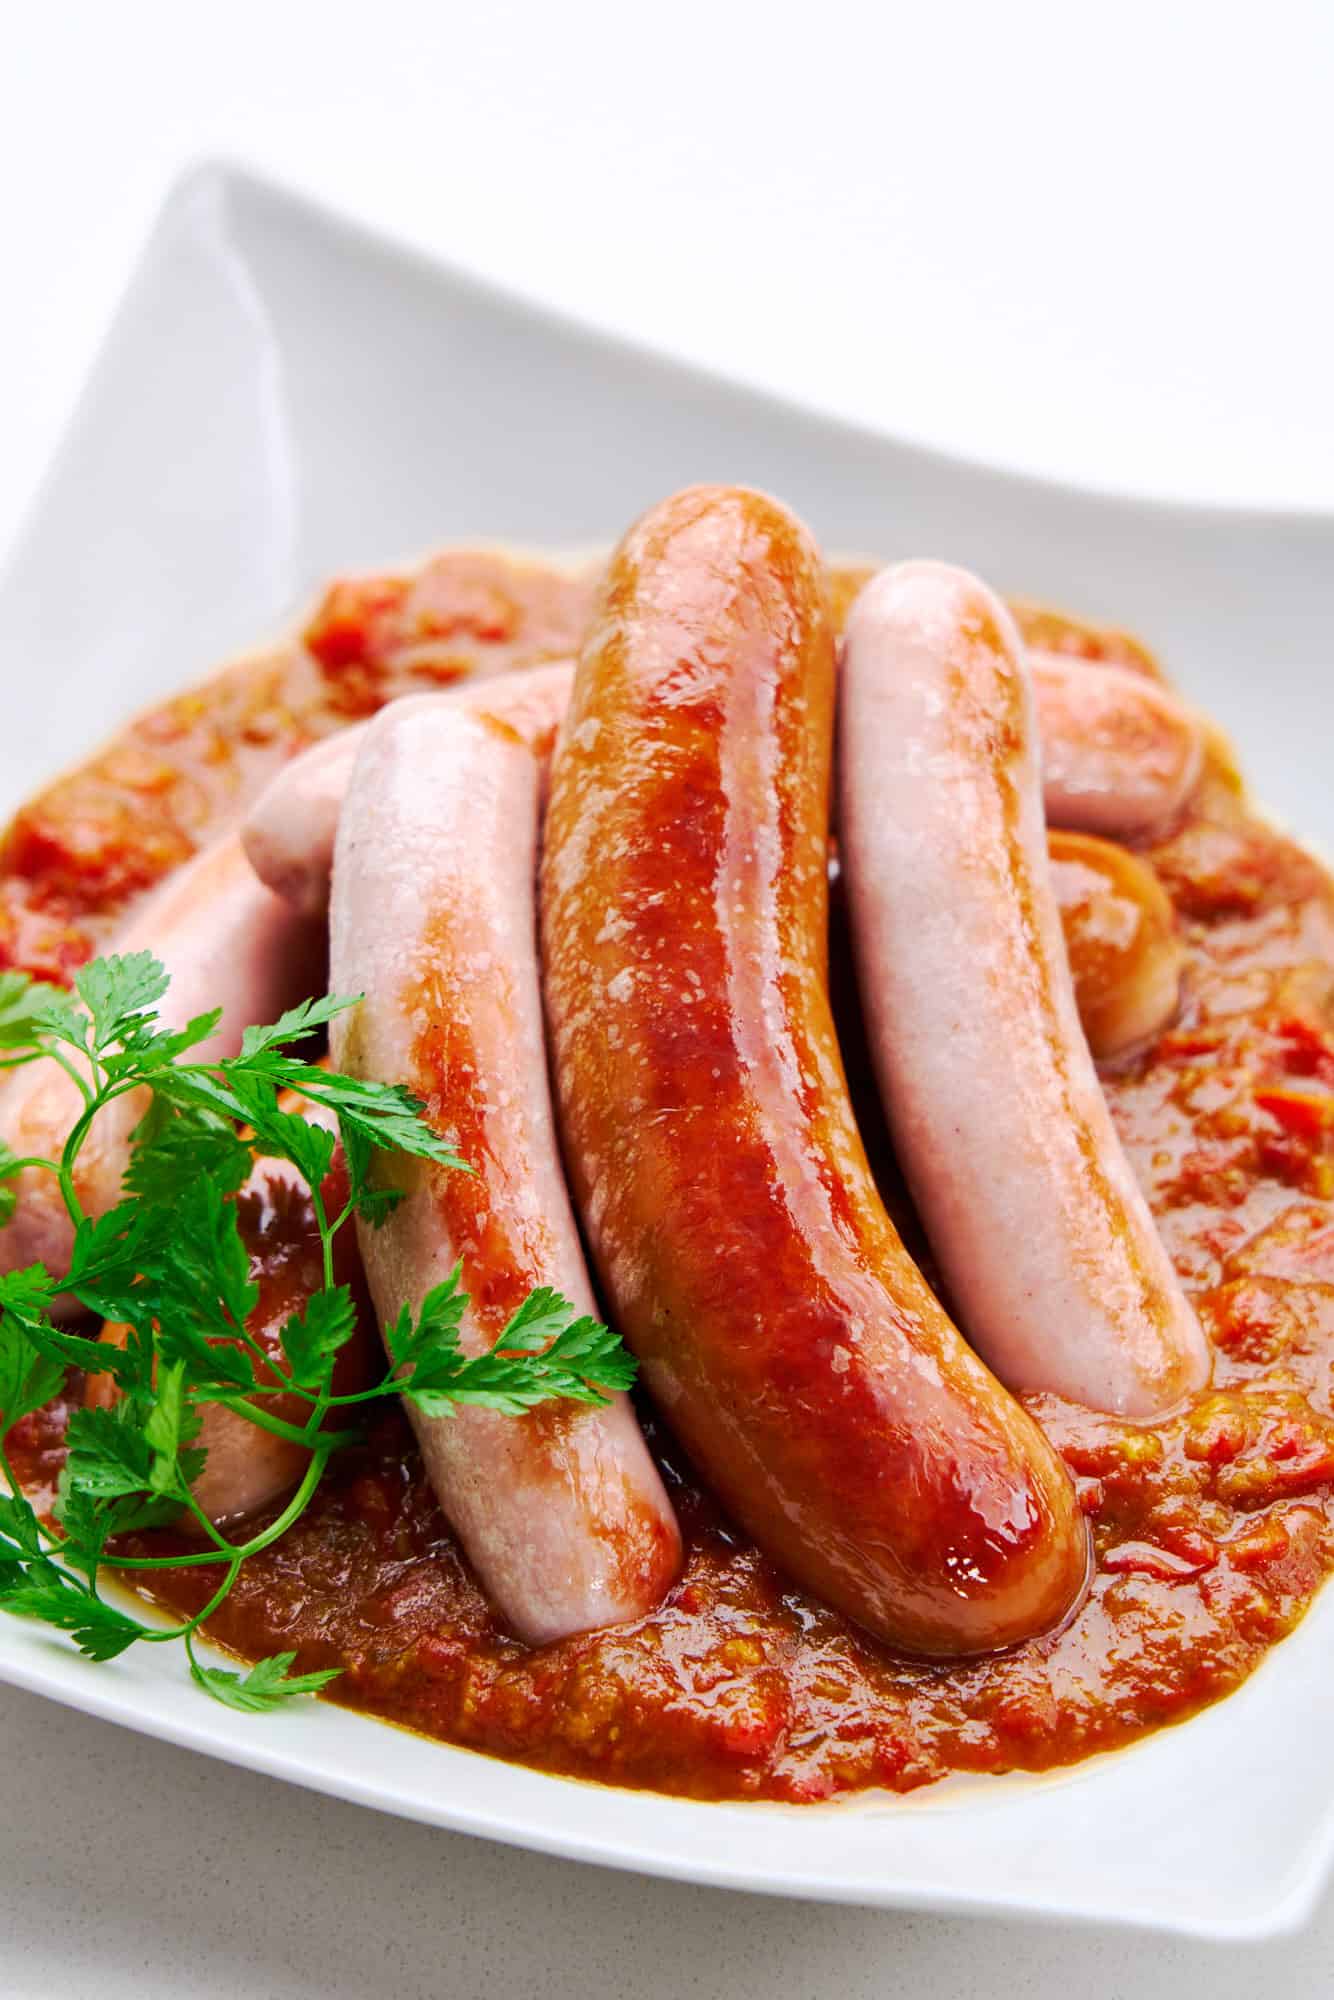 Pan-fried sausages with a sweet and spicy tomato curry sauce.